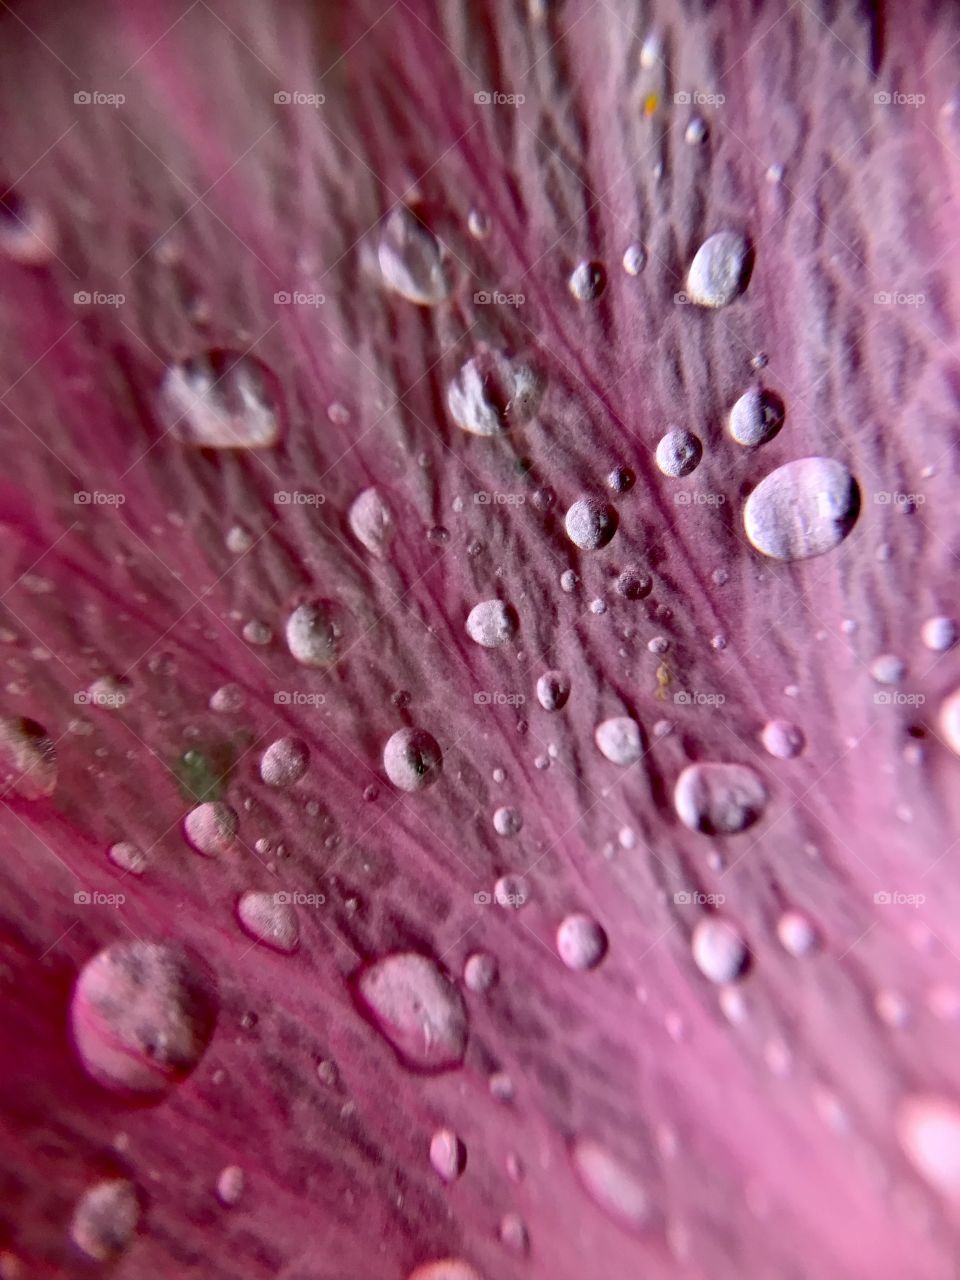 Pink pedals with water droplets